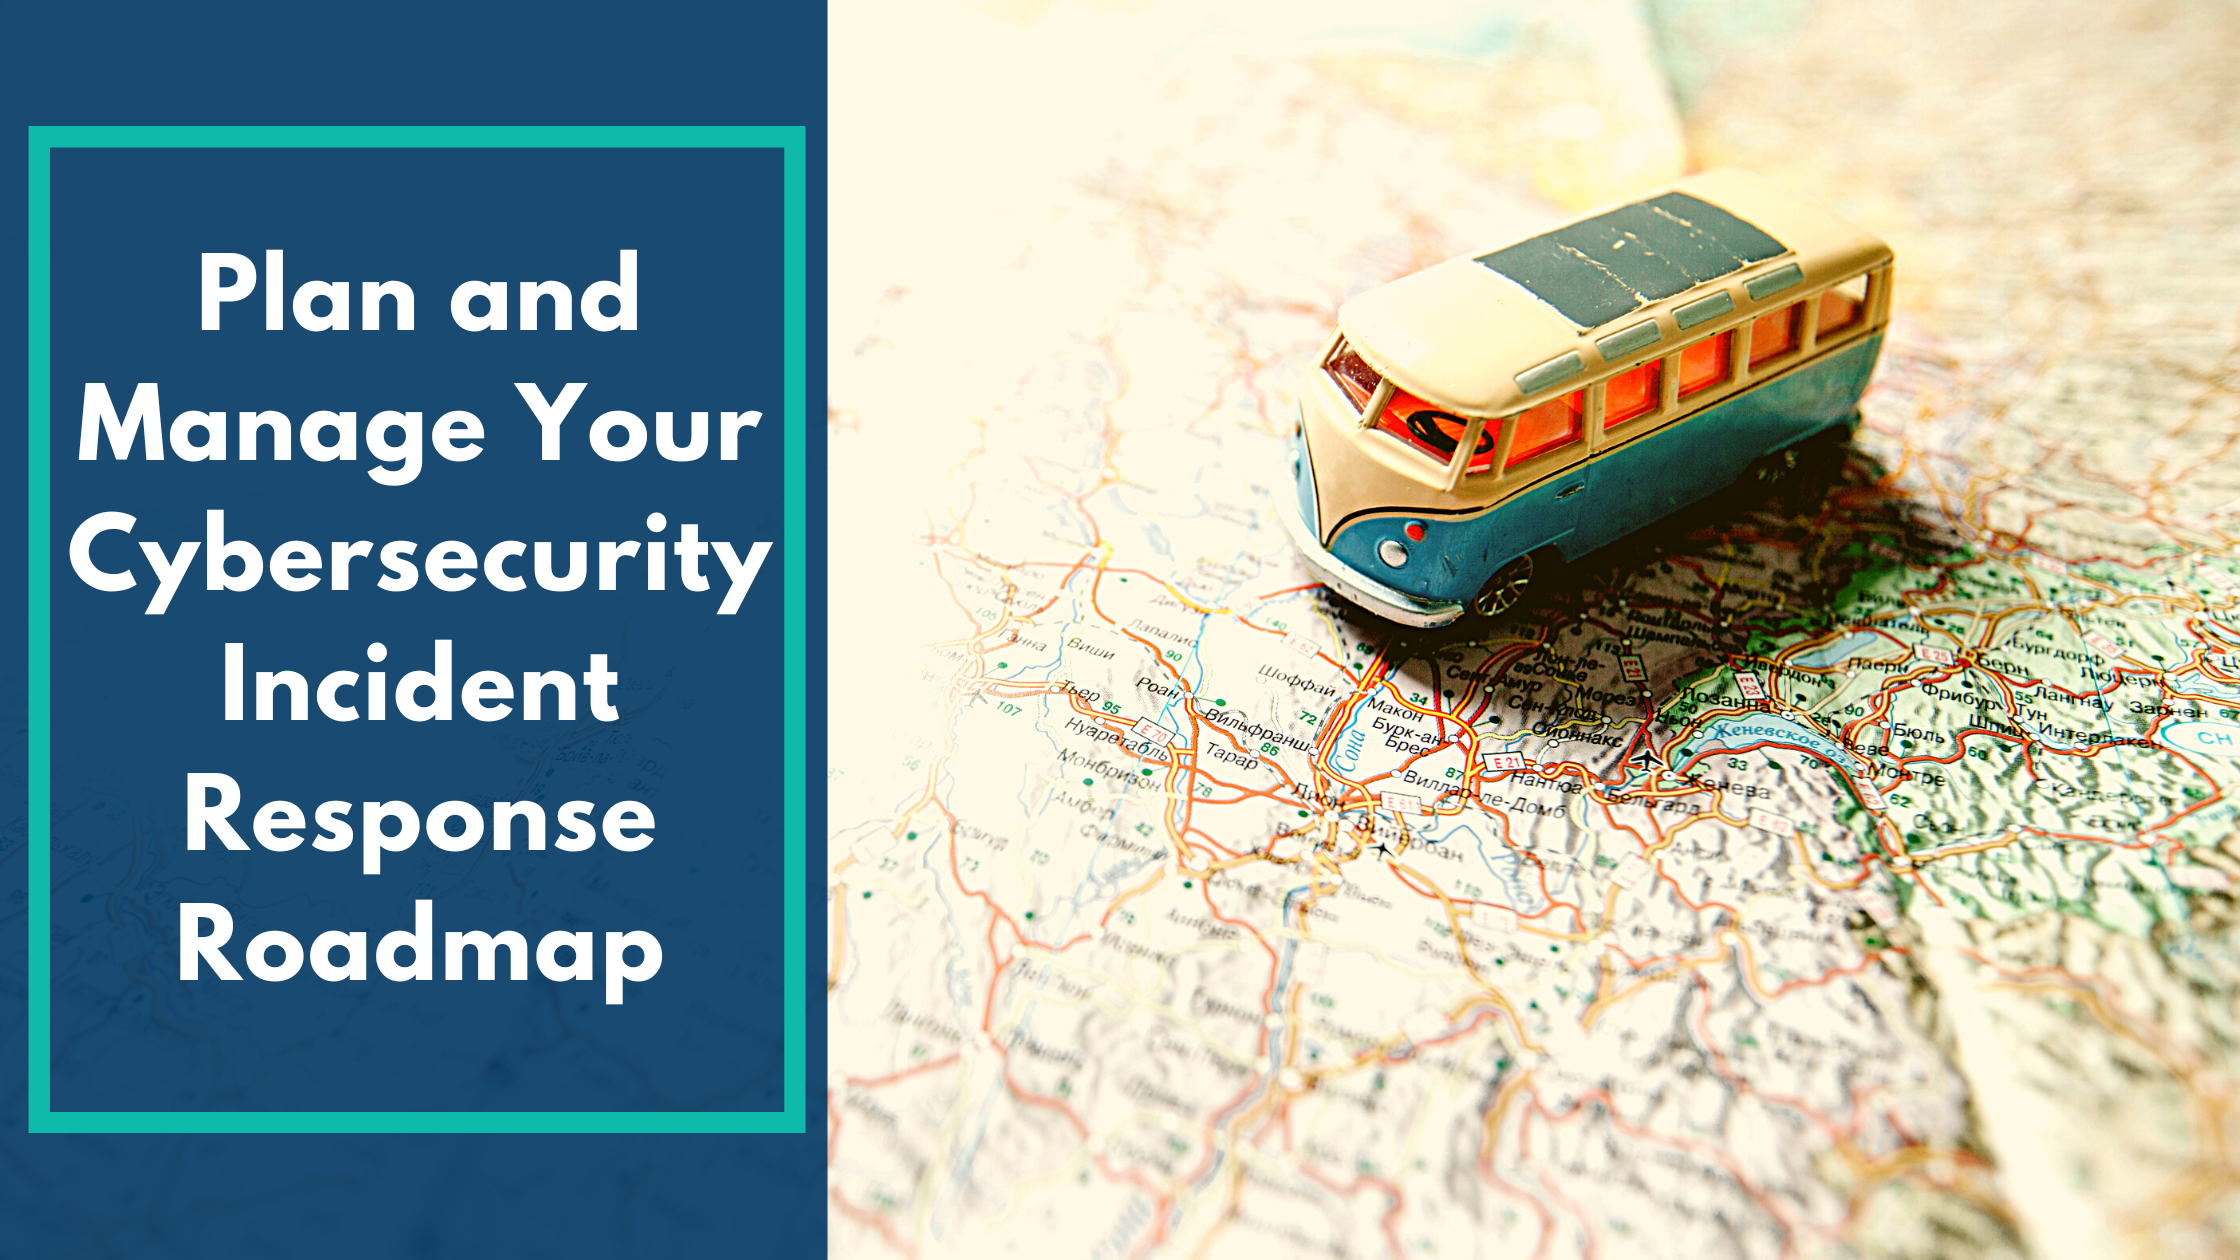 Plan and Manage Your Cybersecurity Incident Response Roadmap